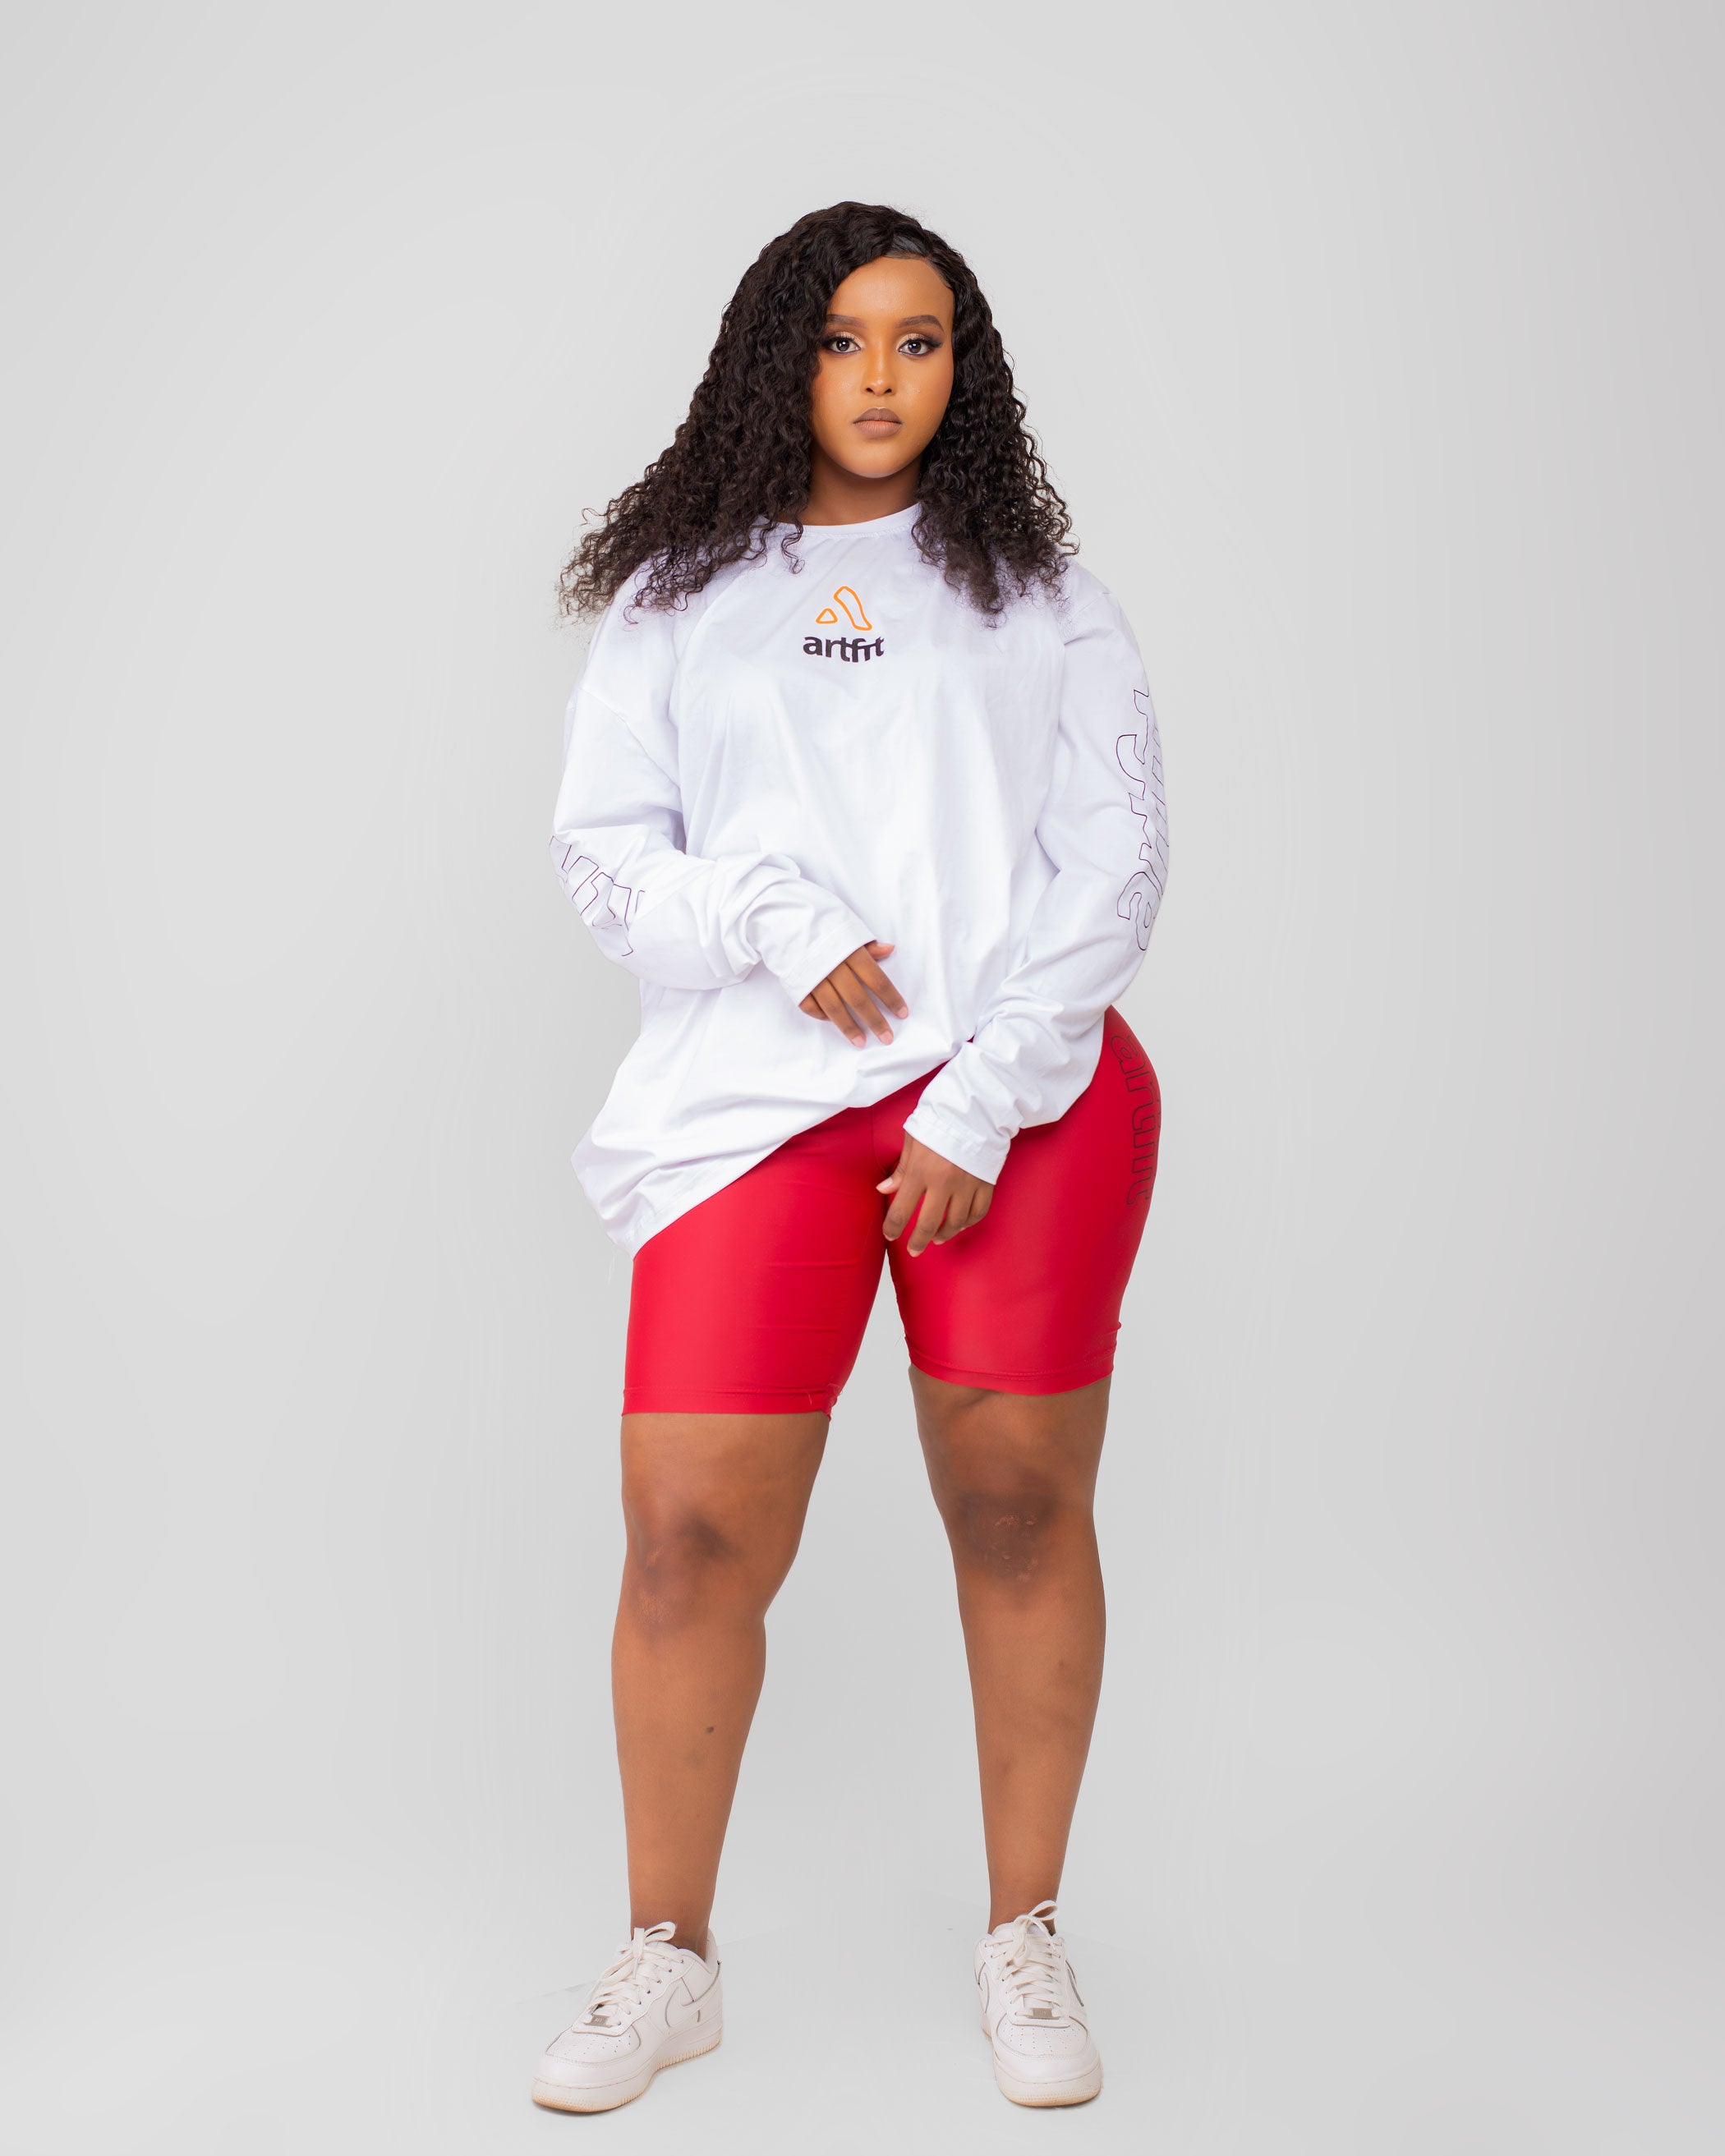 Classic Oversized Long Sleeved Tshirt and Biker Short - White and Maroon